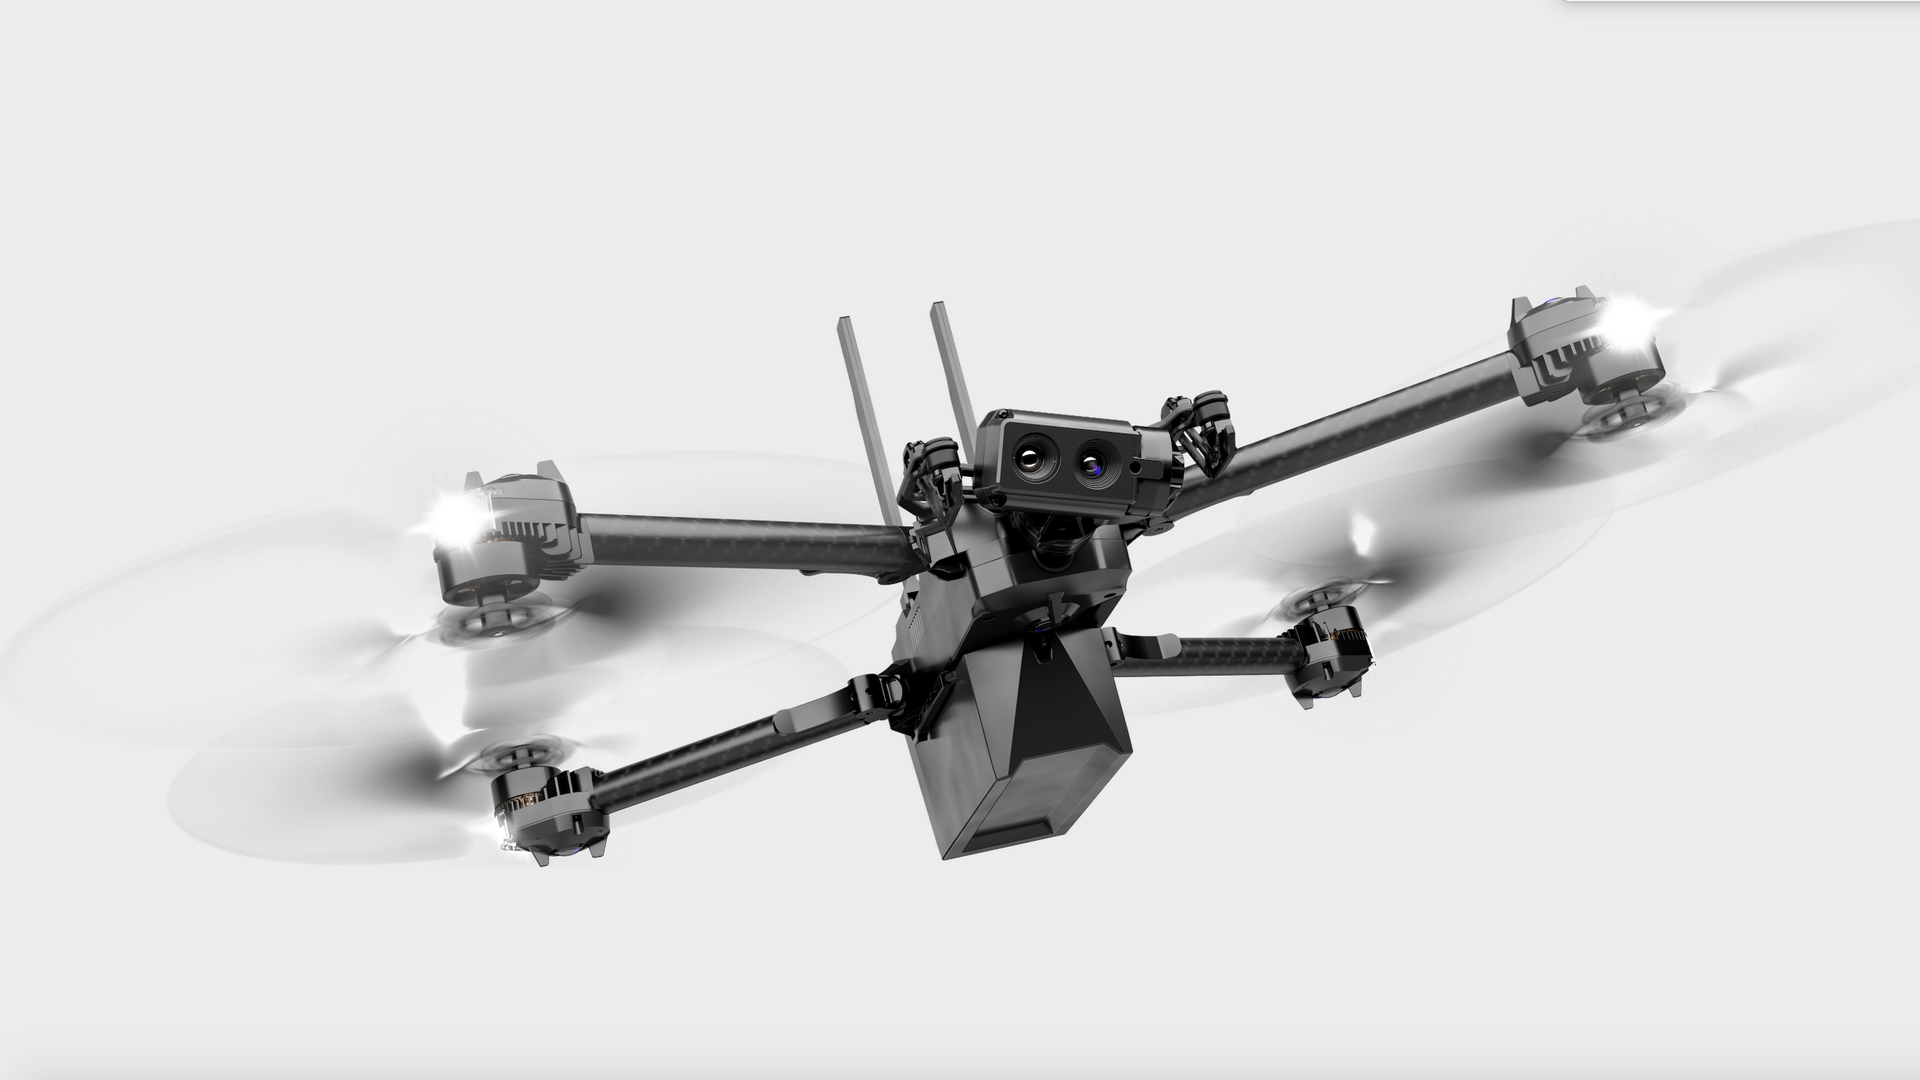 A drone from Skydio